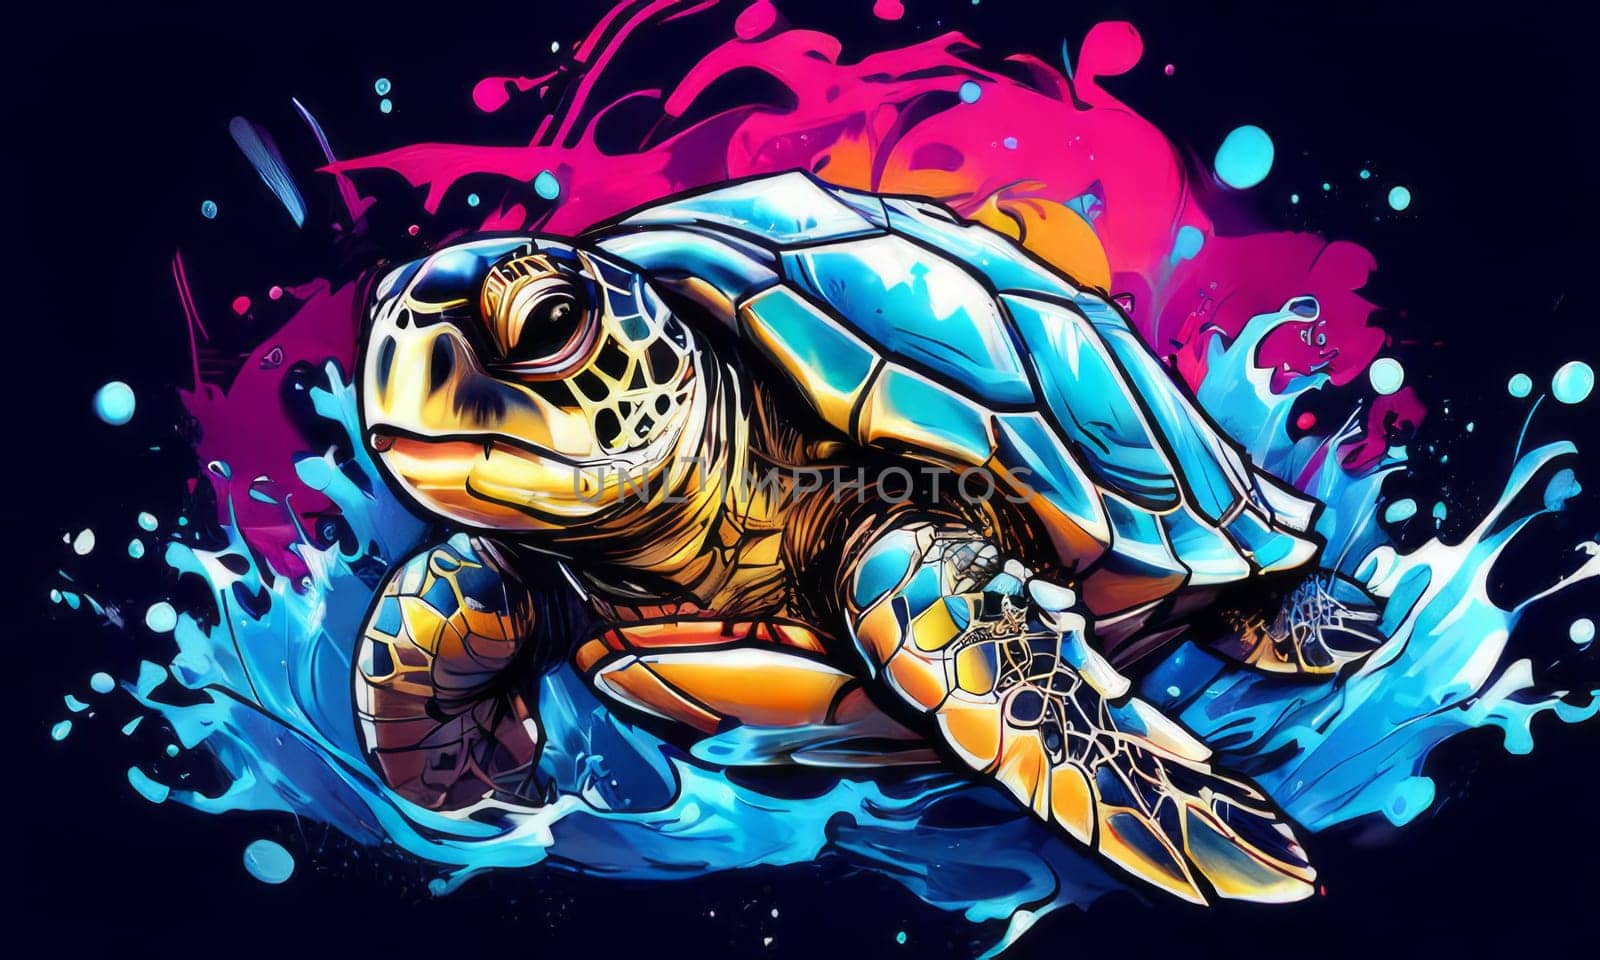 Serene turtle gracefully swimming through water amidst trail of bubbles. For fashion, clothing design, animal themed clothing advertising, as illustration for interesting clothing style,Tshirt design. by Angelsmoon